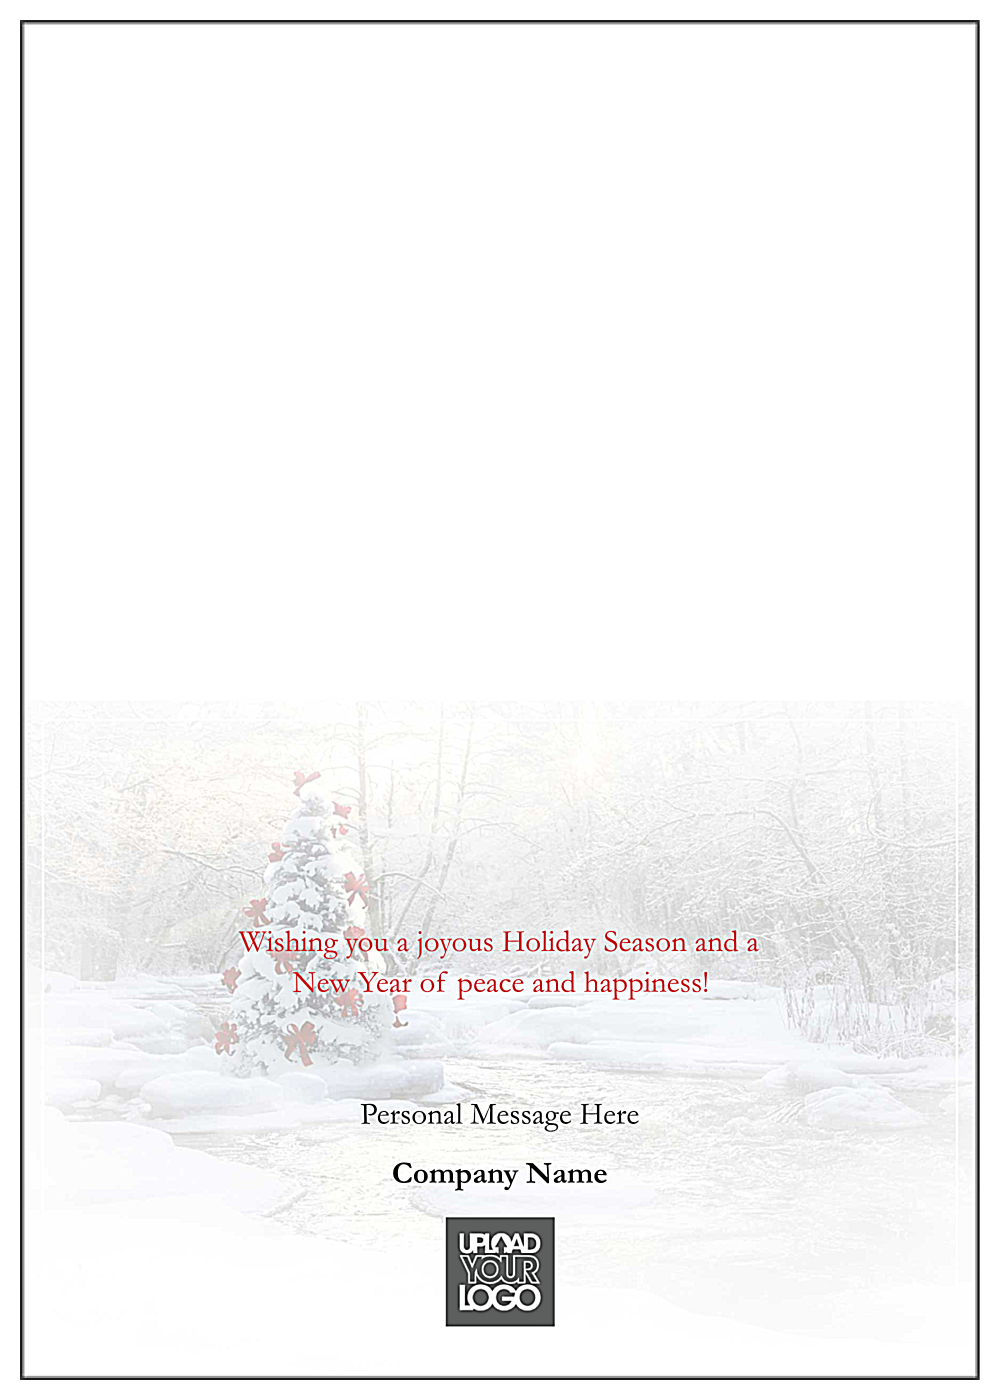 Merry Christmas Tree back - Greeting Cards Maker